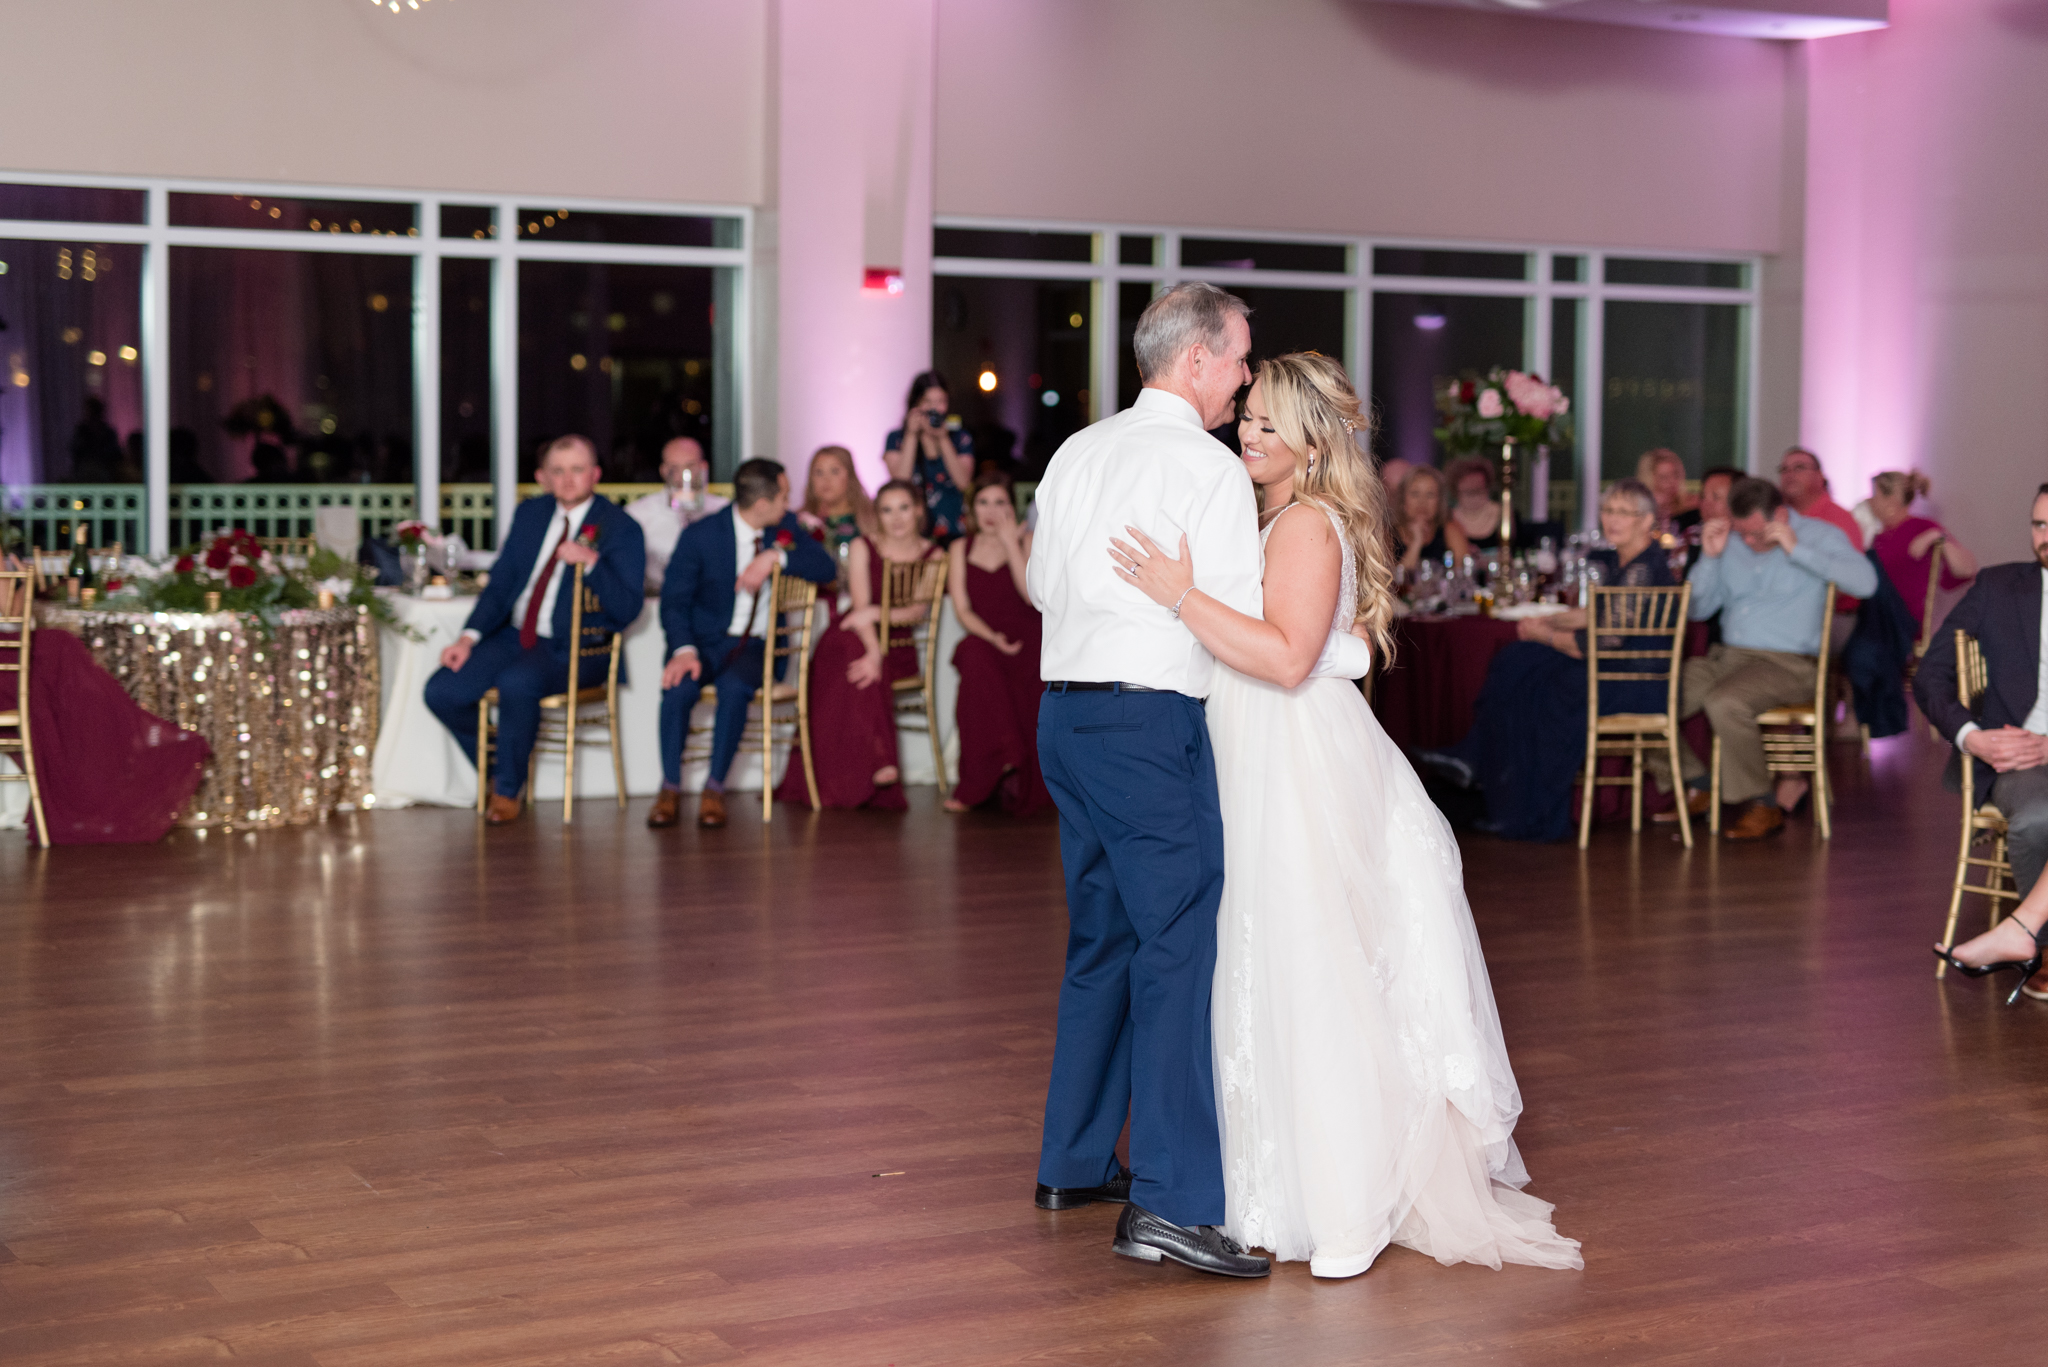 Bride and father dance together.